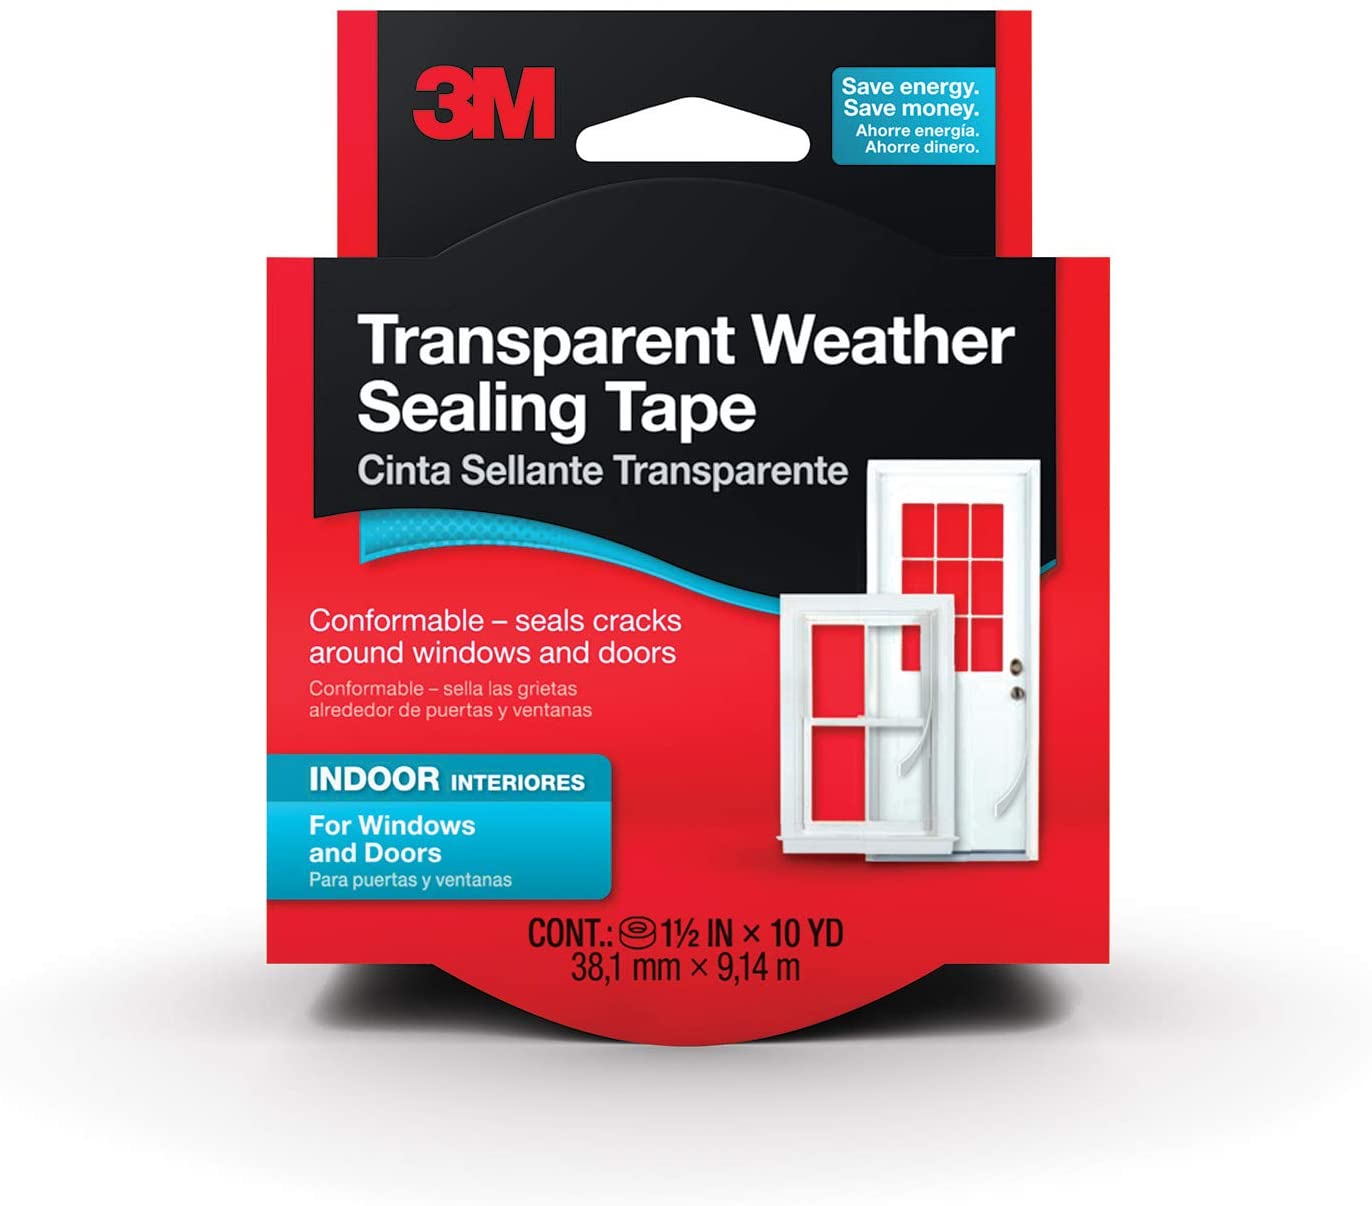 3M Interior Transparent Weather Sealing Tape, Windows, Doors, Moisture Resistant Tape, 1.5 in. x 10 yd. Roll